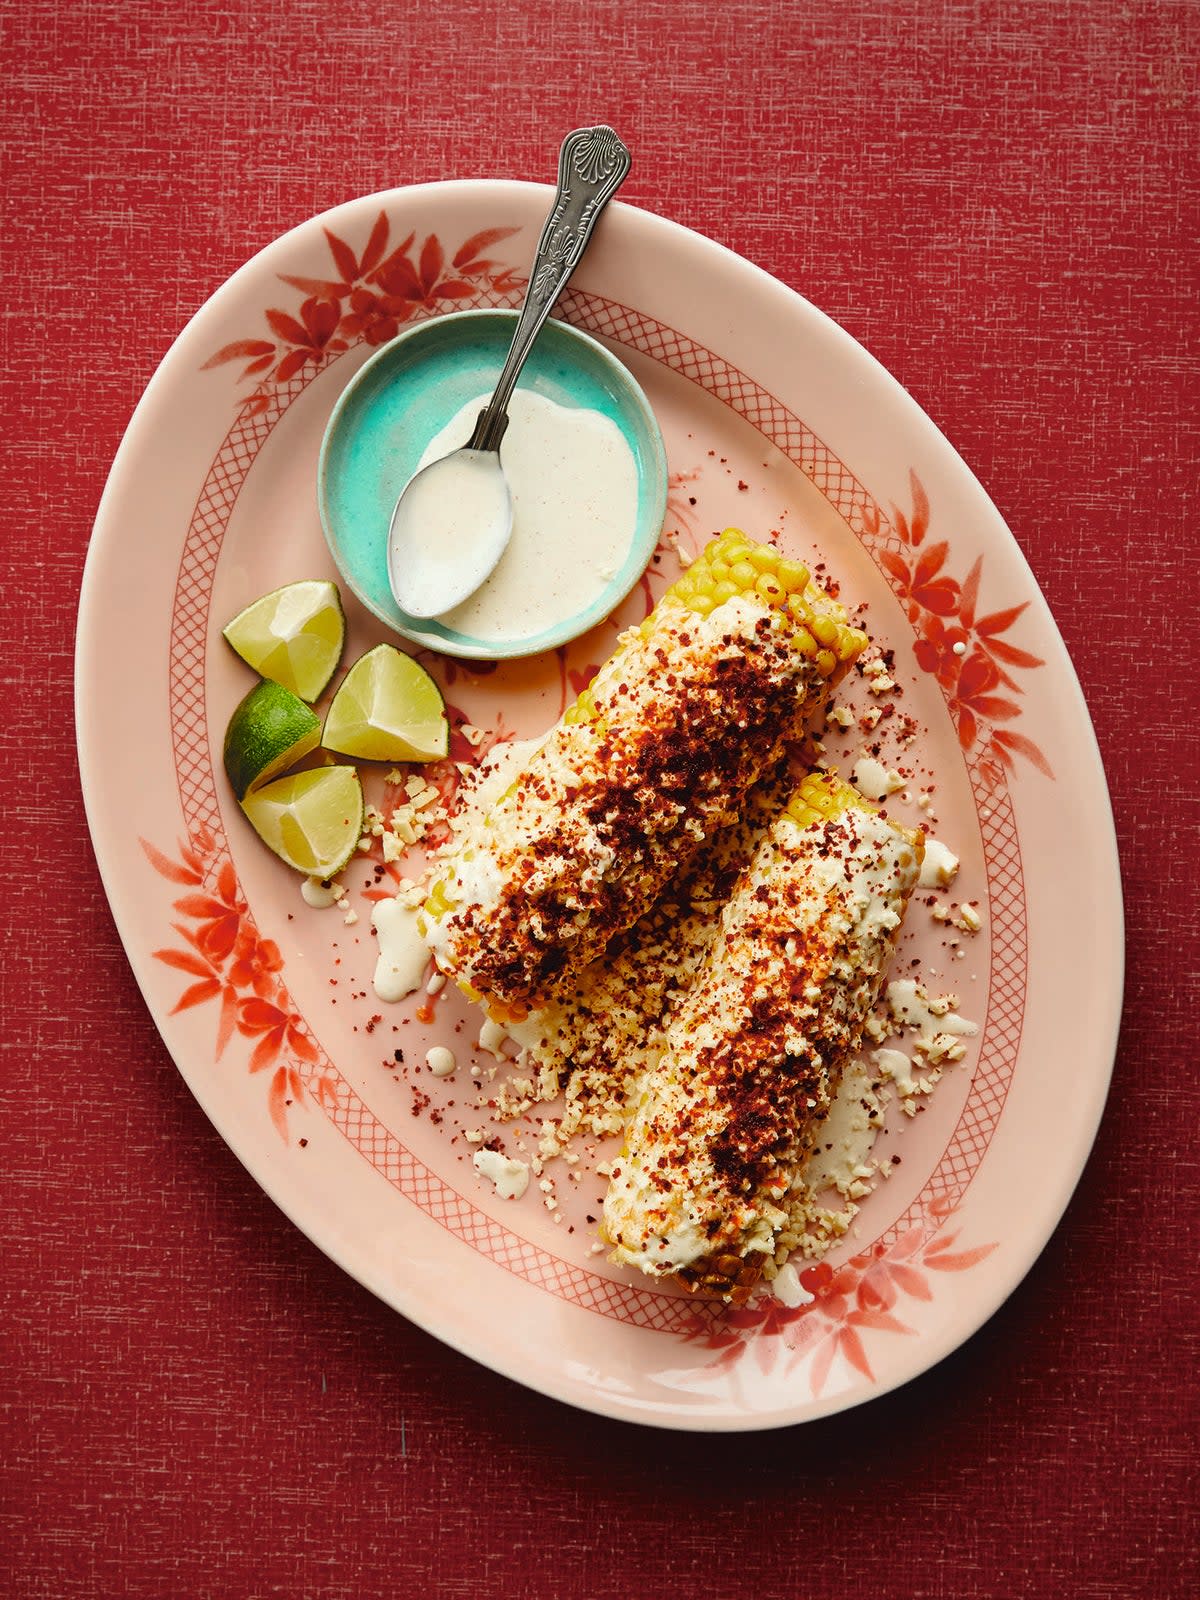 This simple starter is inspired by Mexican elotes (Sam A Harris)